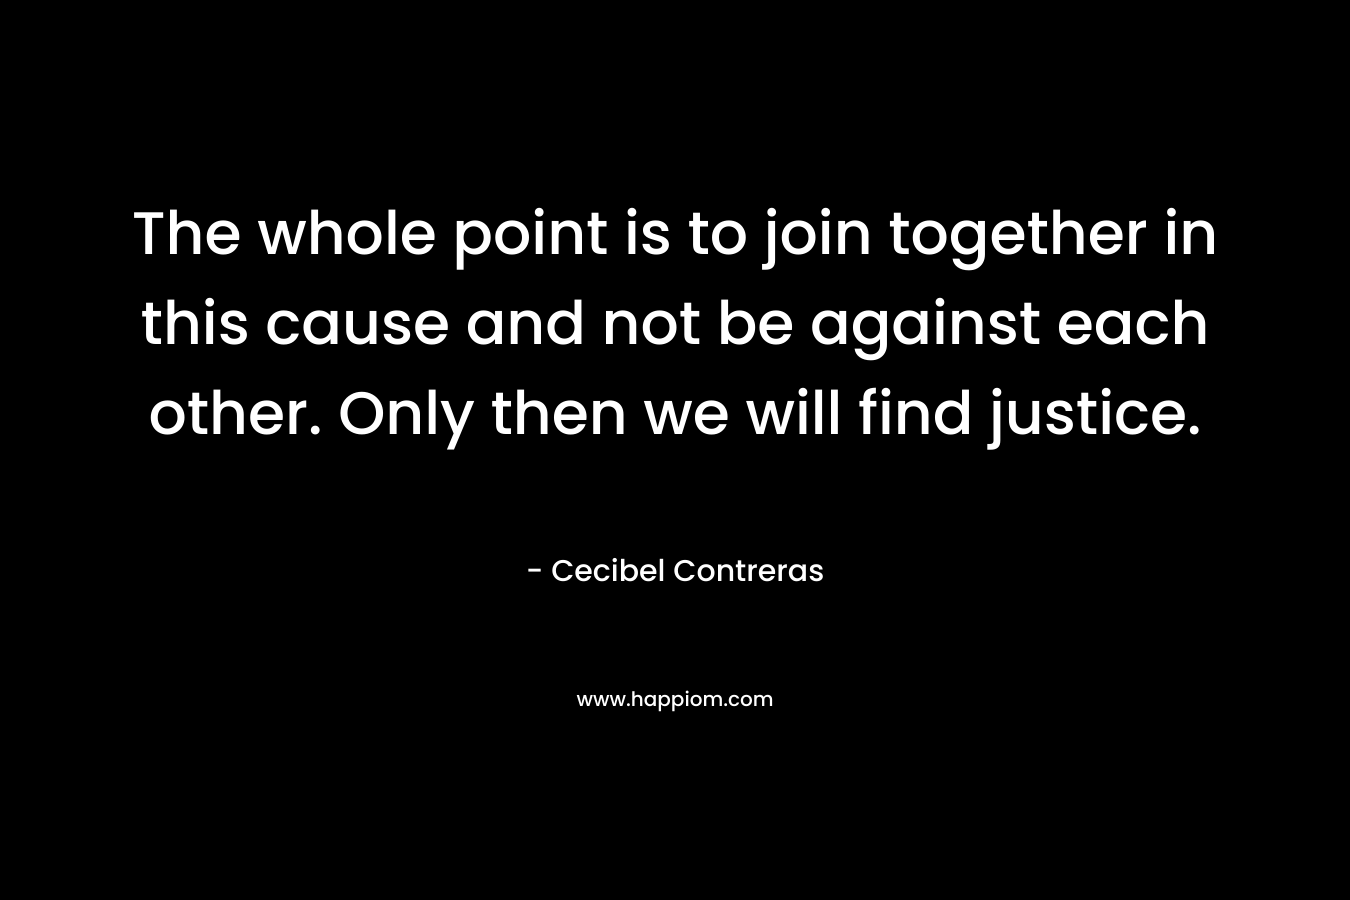 The whole point is to join together in this cause and not be against each other. Only then we will find justice. – Cecibel Contreras